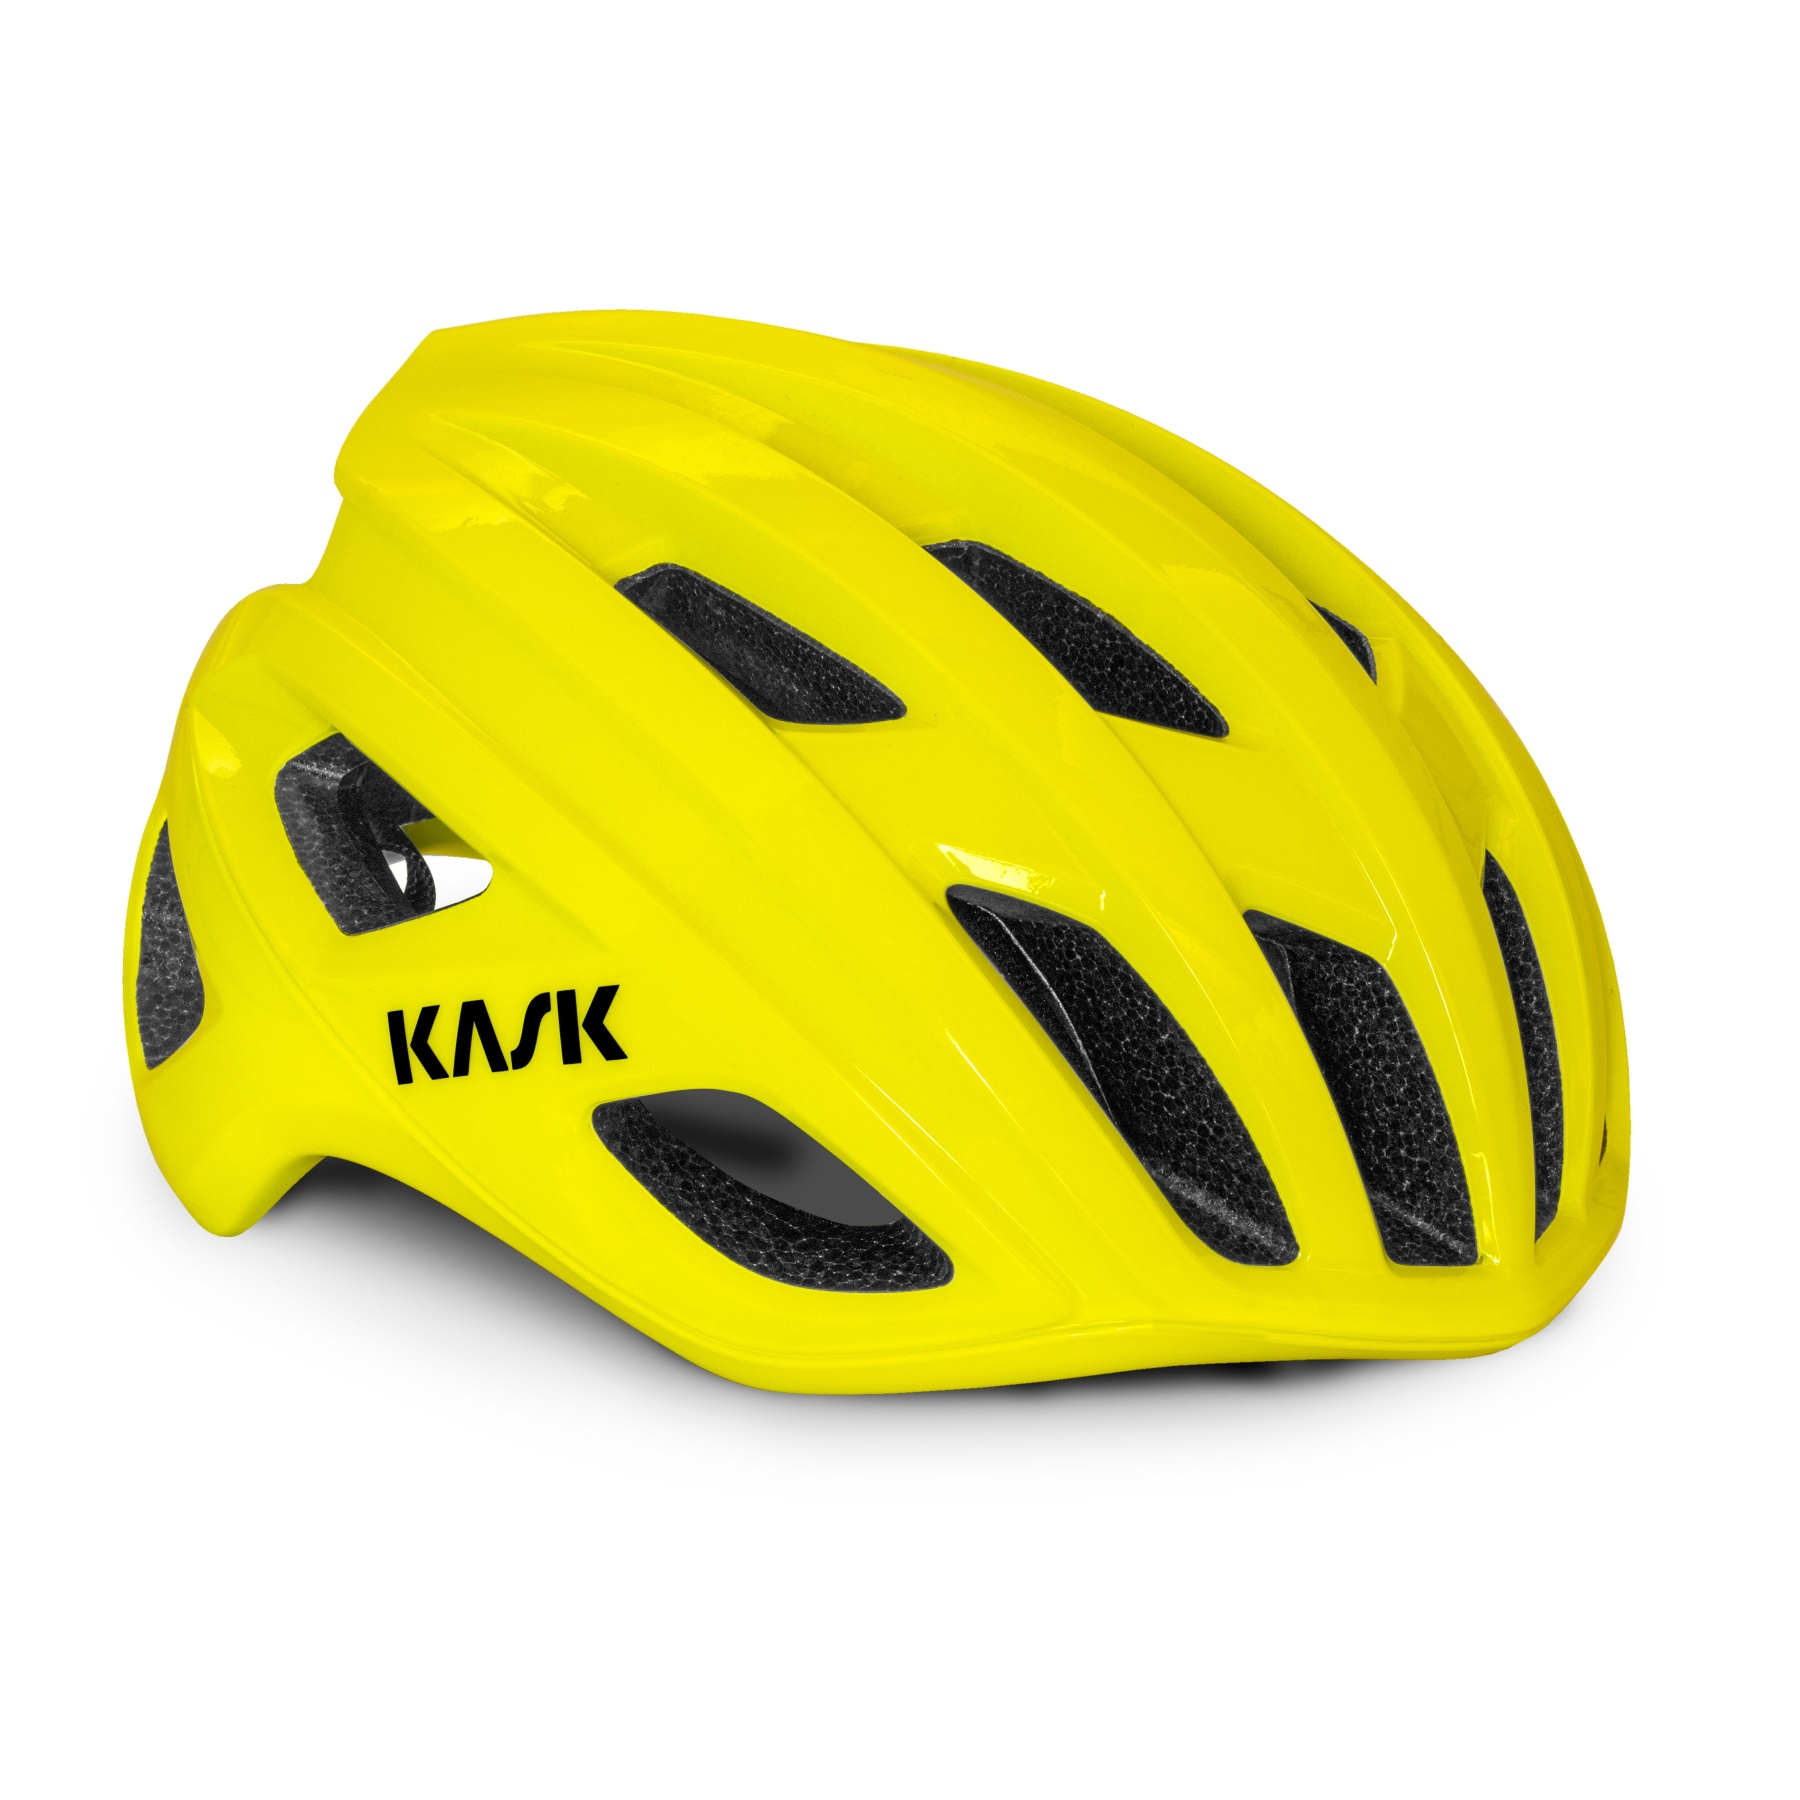 Image of KASK Mojito³ WG11 Road Helmet - yellow fluo